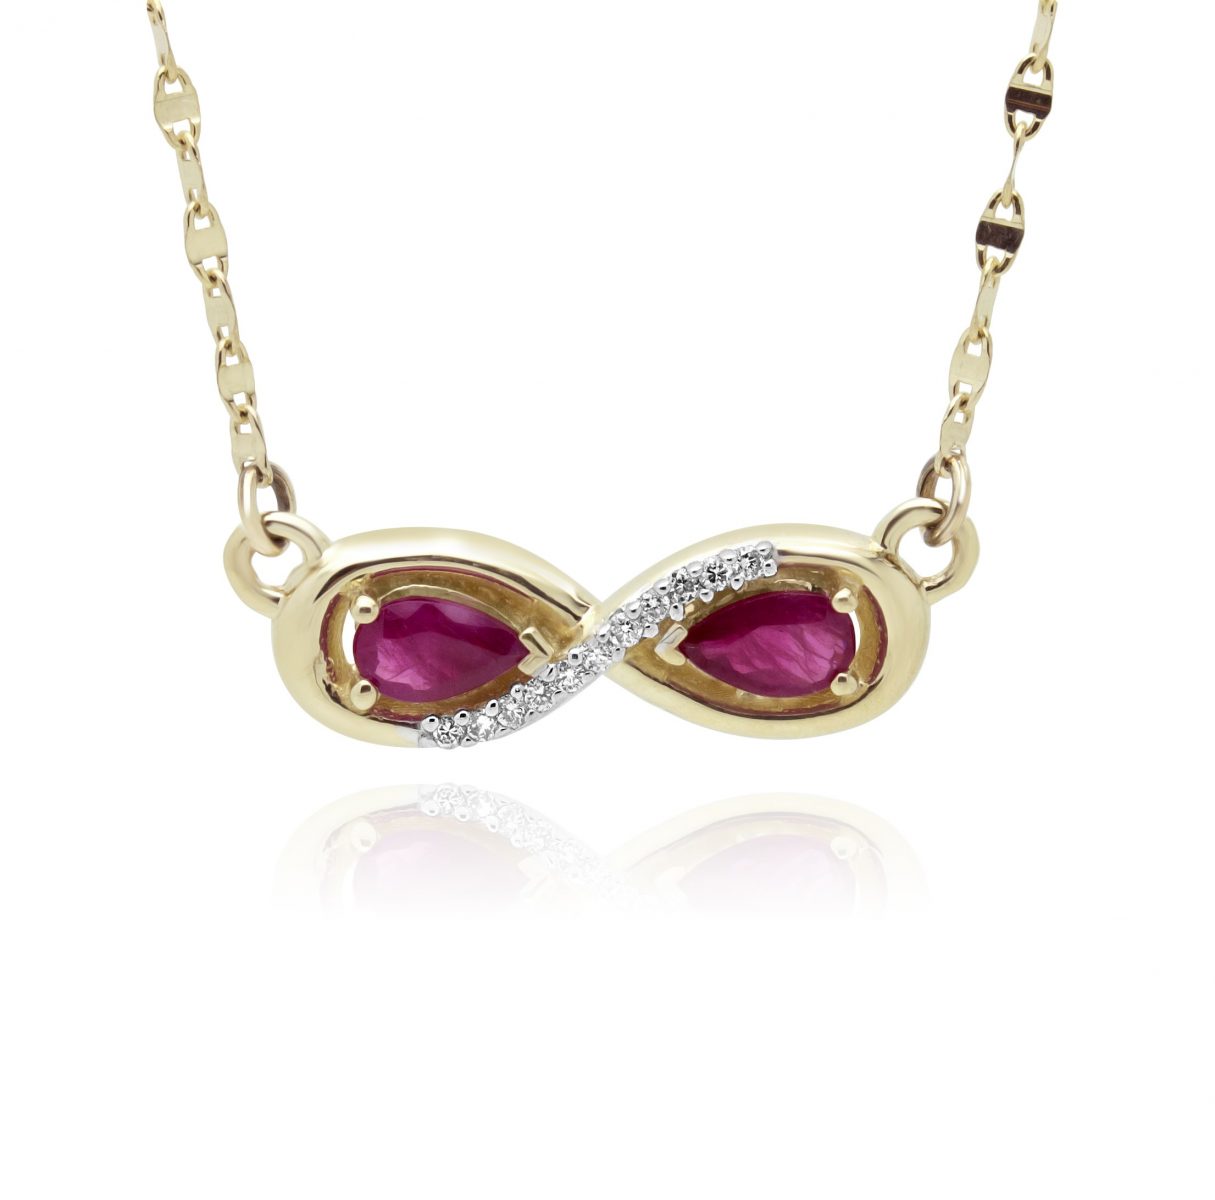 0.07 carat diamond and ruby infinity necklace 14k yellow gold